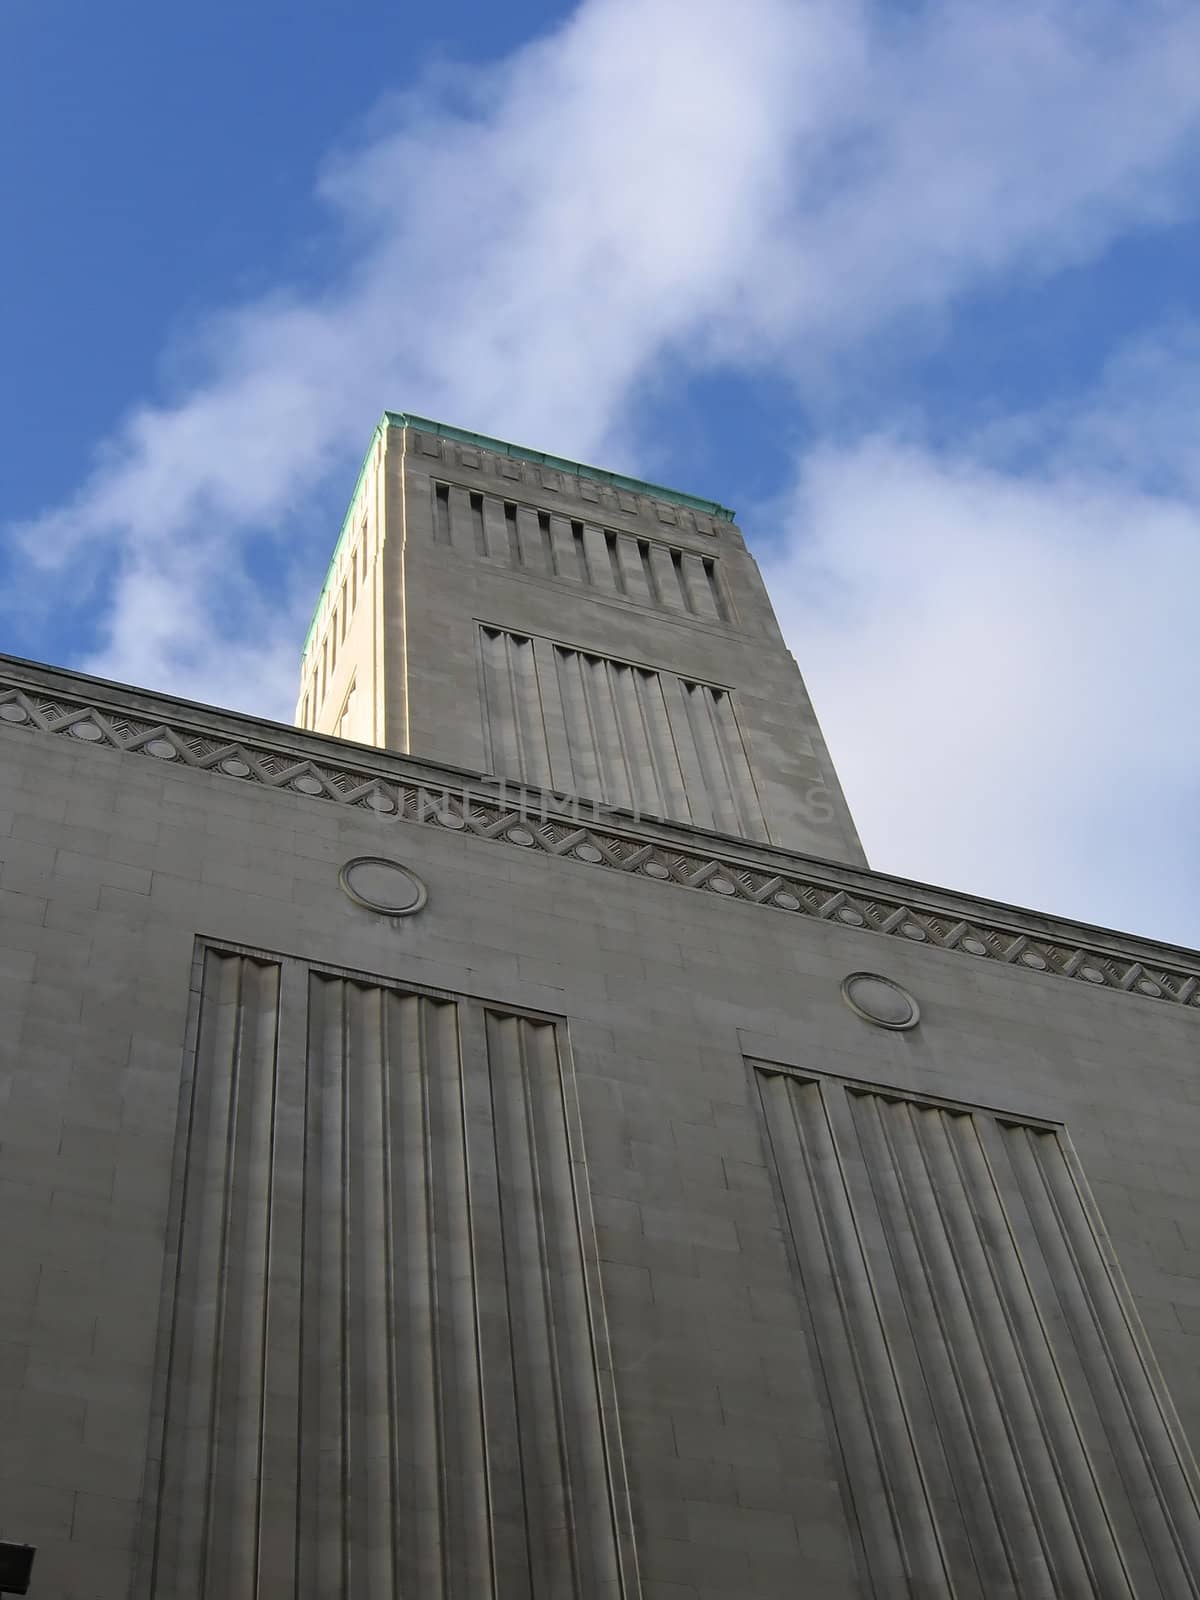 Art Deco Ventilation Building in Liverpool by green308